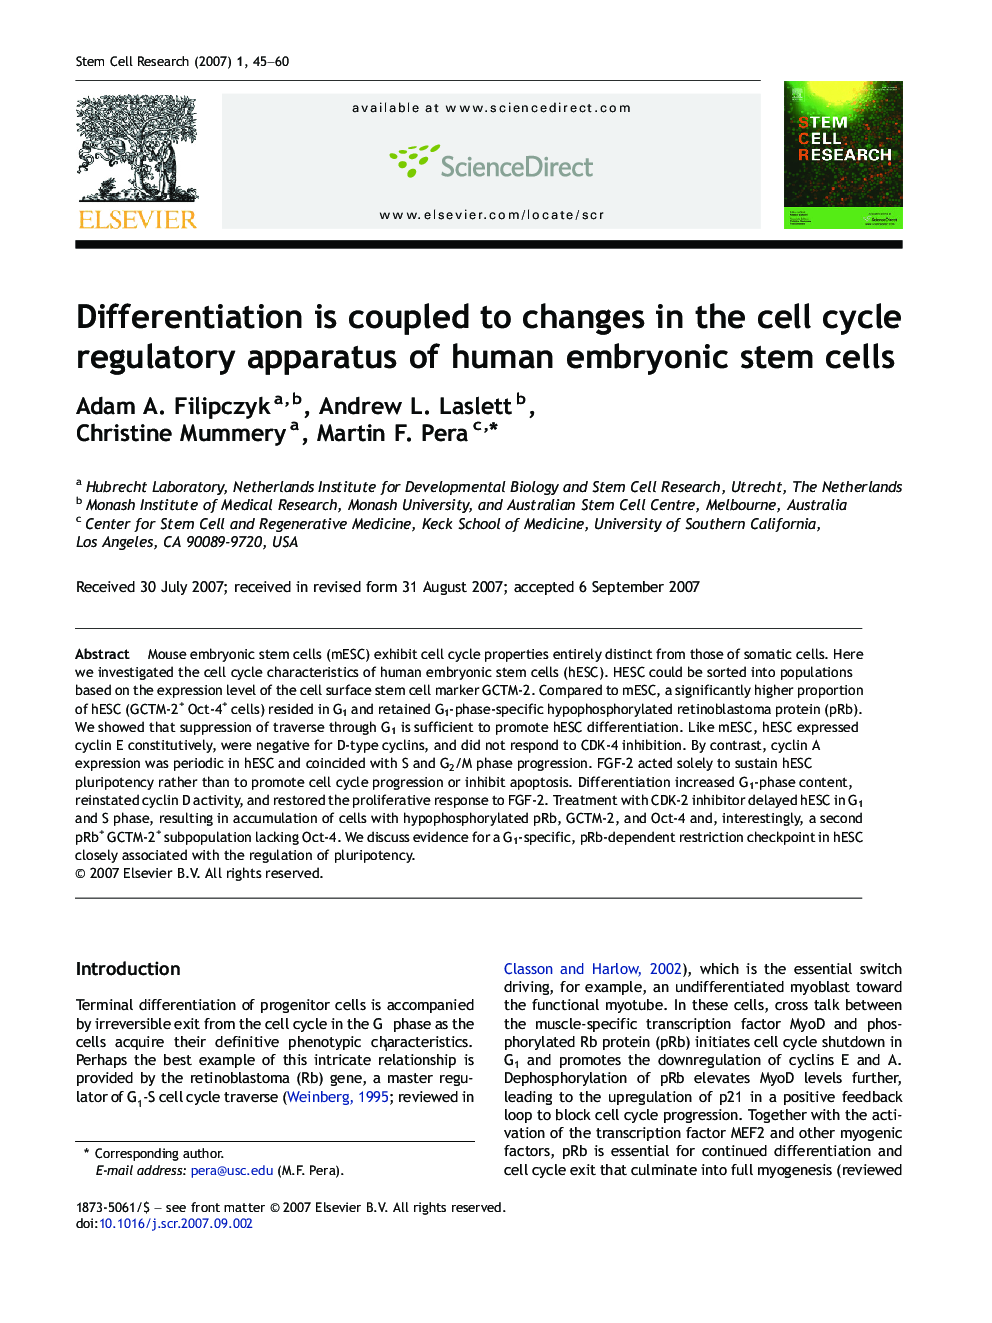 Differentiation is coupled to changes in the cell cycle regulatory apparatus of human embryonic stem cells